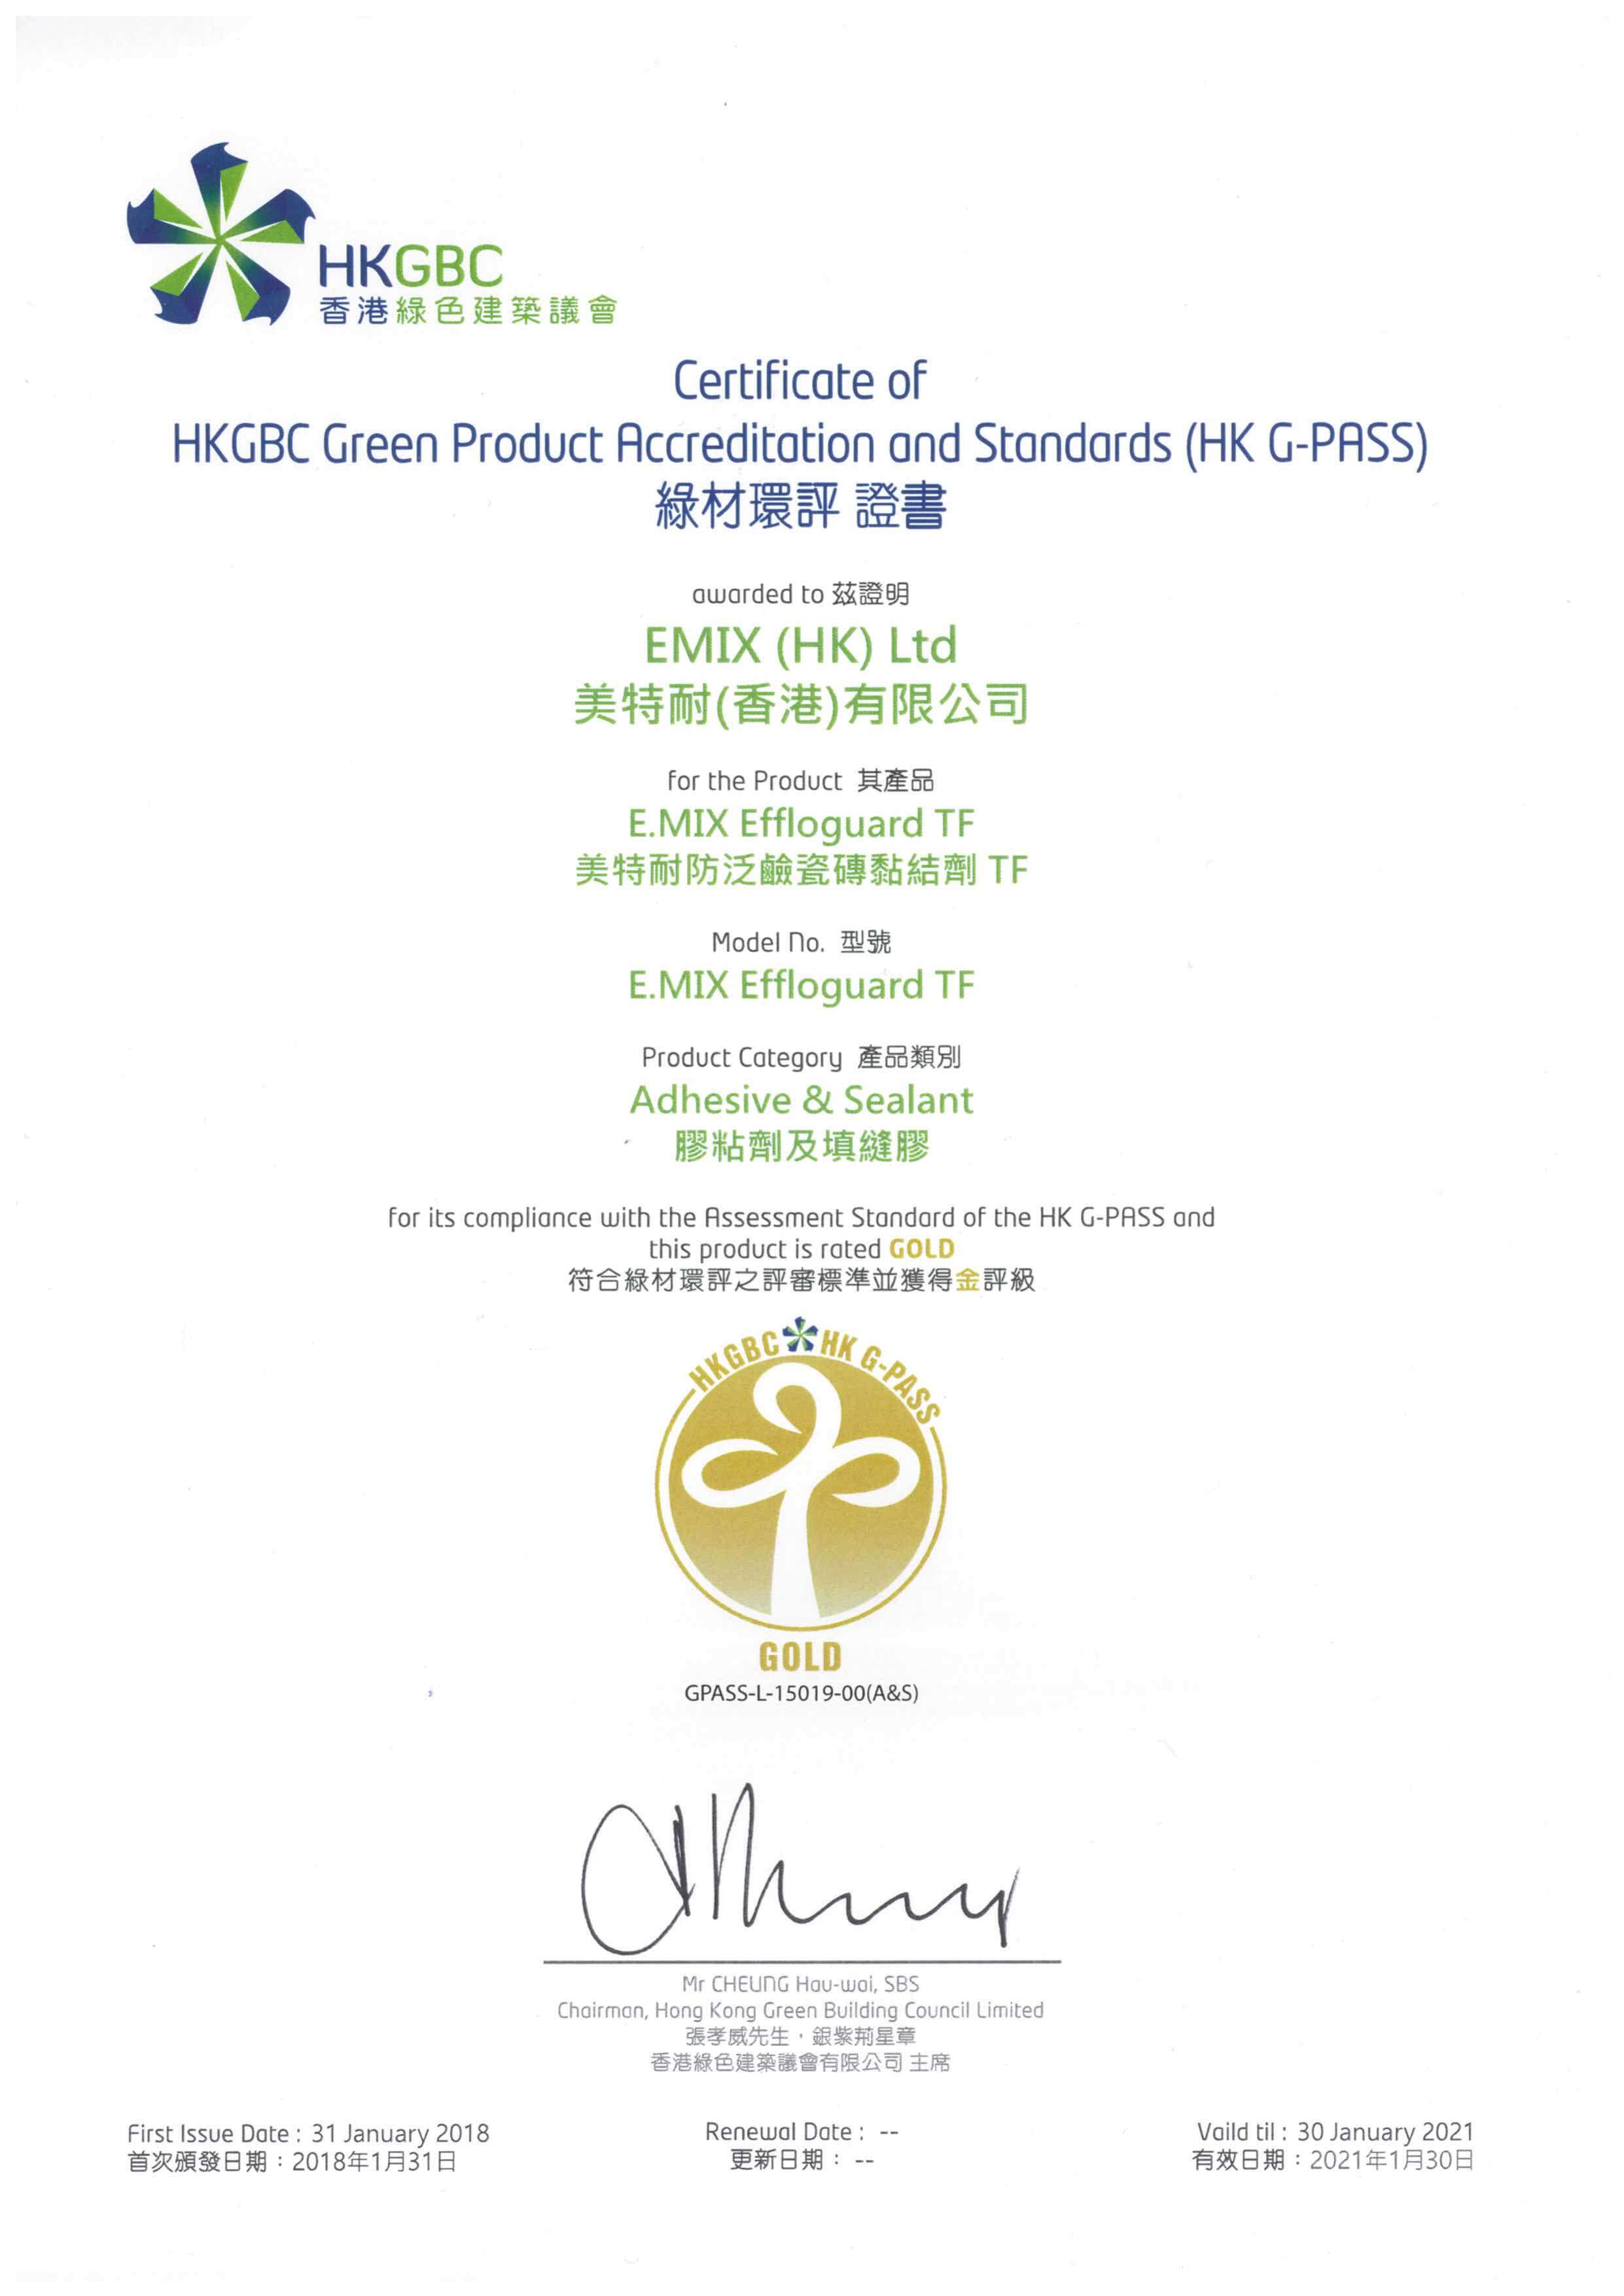 Gold-Rated Logo - E.MIX Effloguard TF achieve a Gold rating from HKGBC Green Product ...